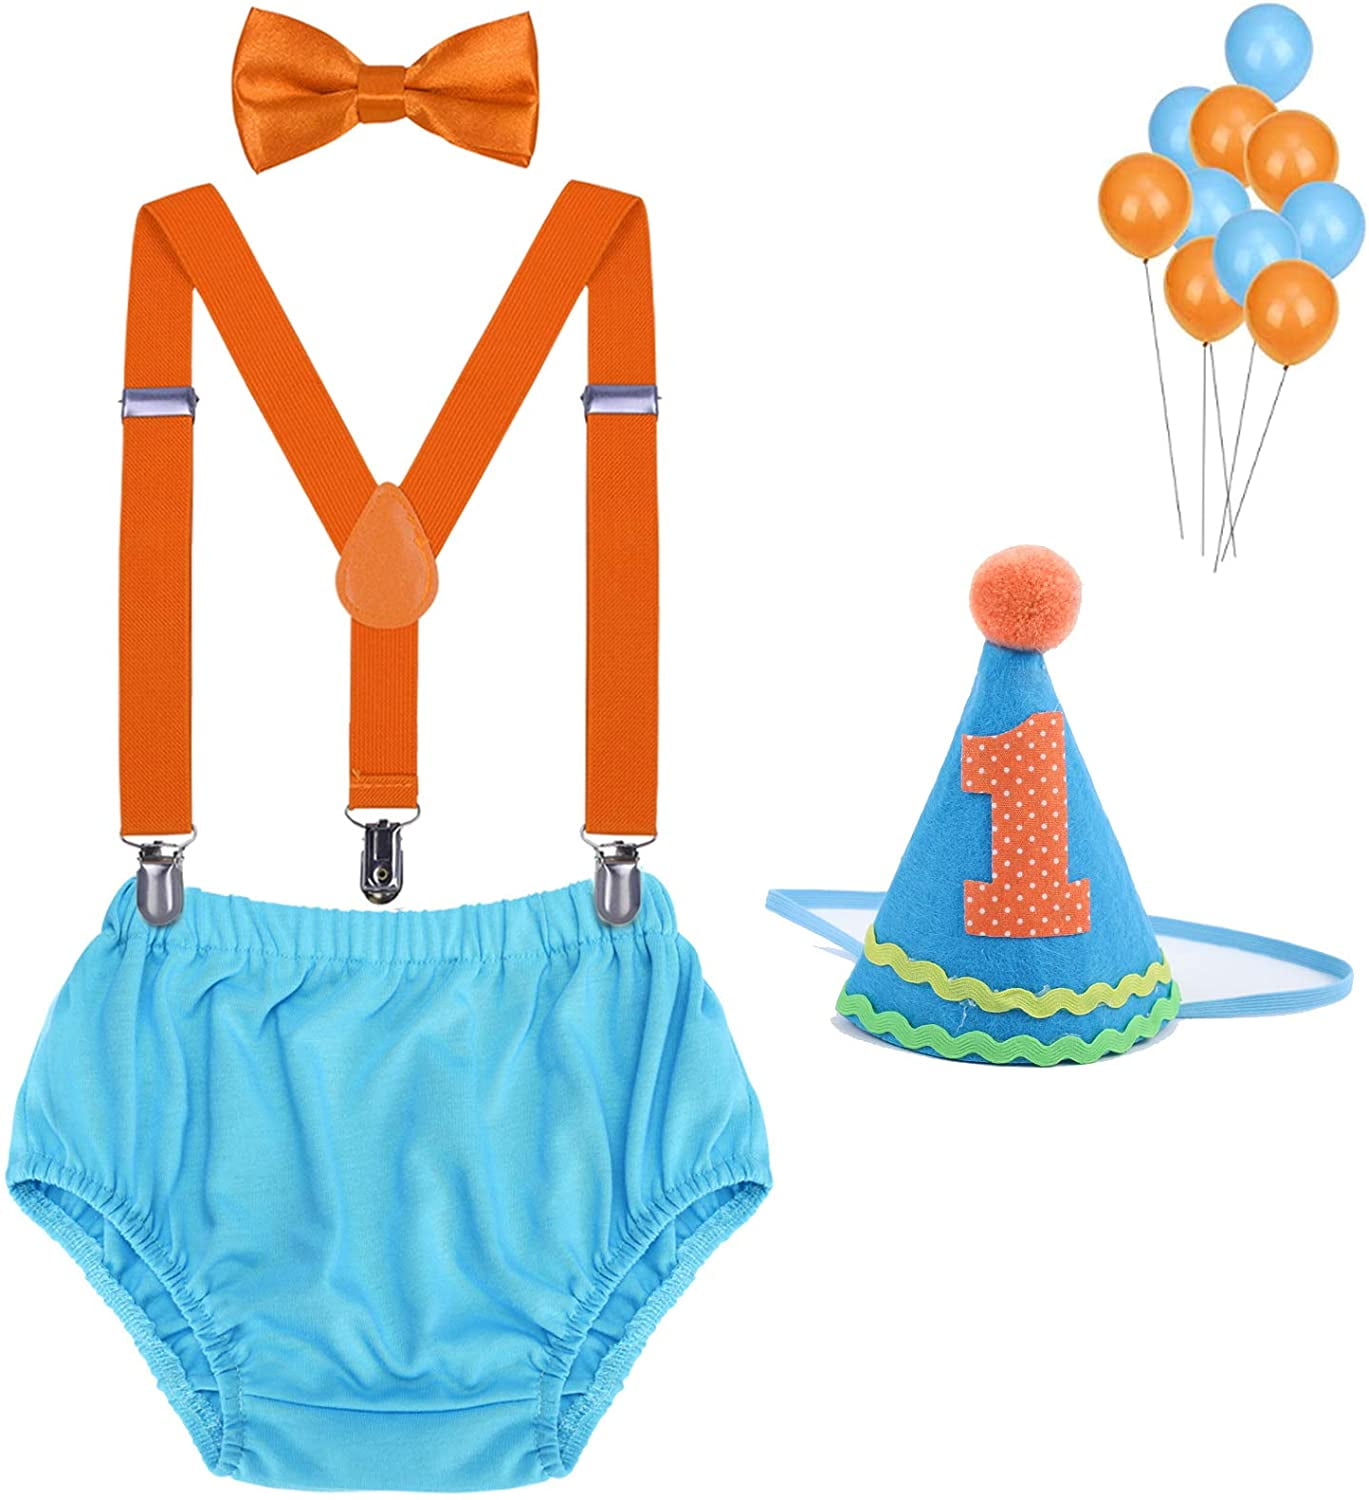 WELROG Baby Boys First Birthday Cake Smash Outfit Bow Tie Suspenders Bloomers Birthday Hat Sparkle Gold Set 